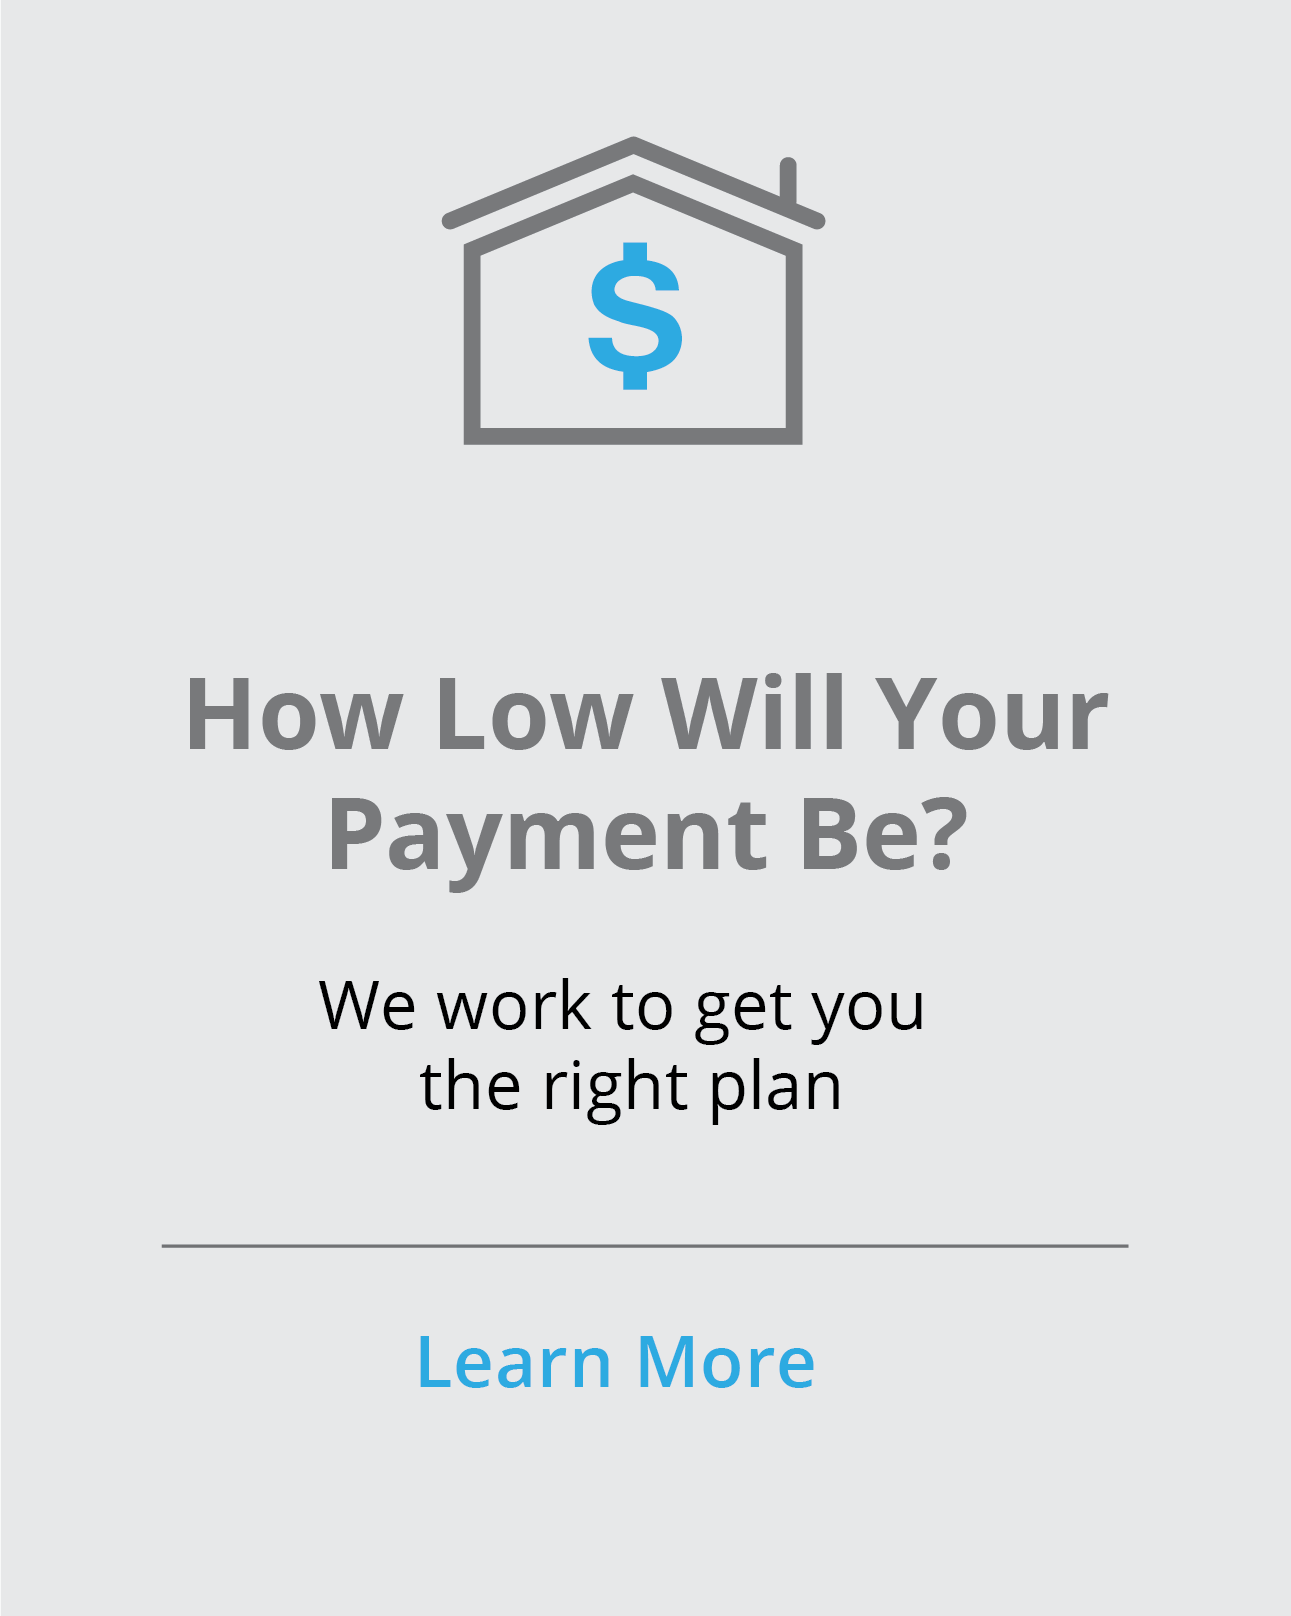 How low will your payment be?